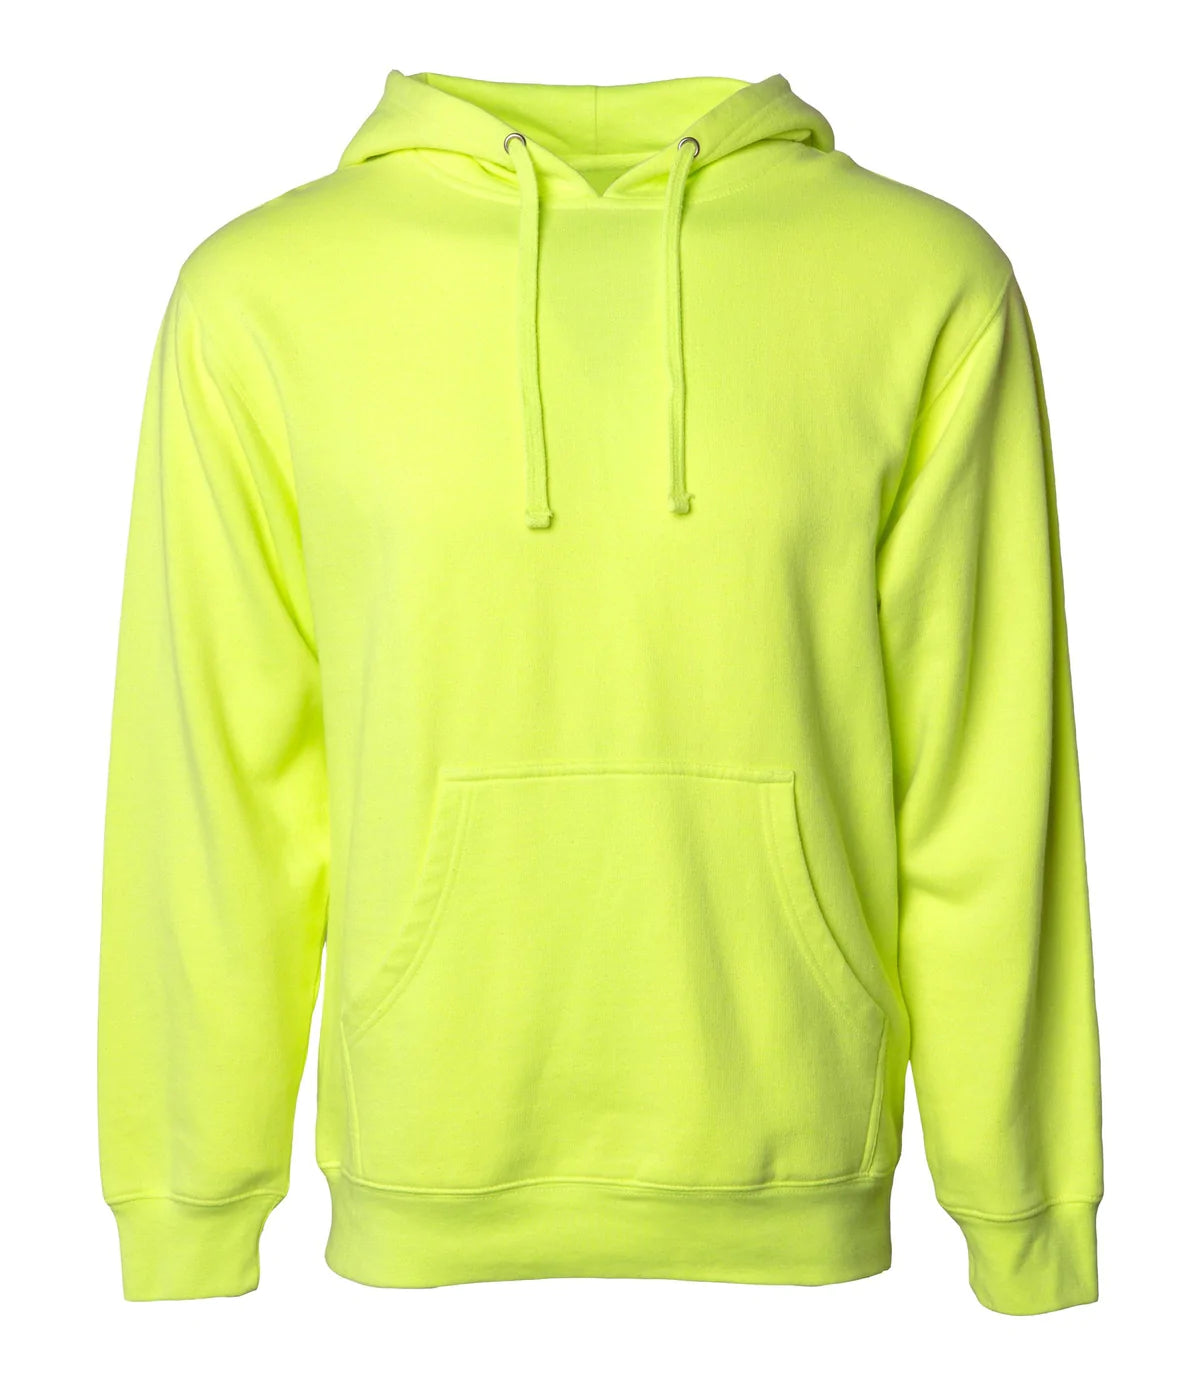 SS4500 Midweight Hooded Pullover Sweatshirt